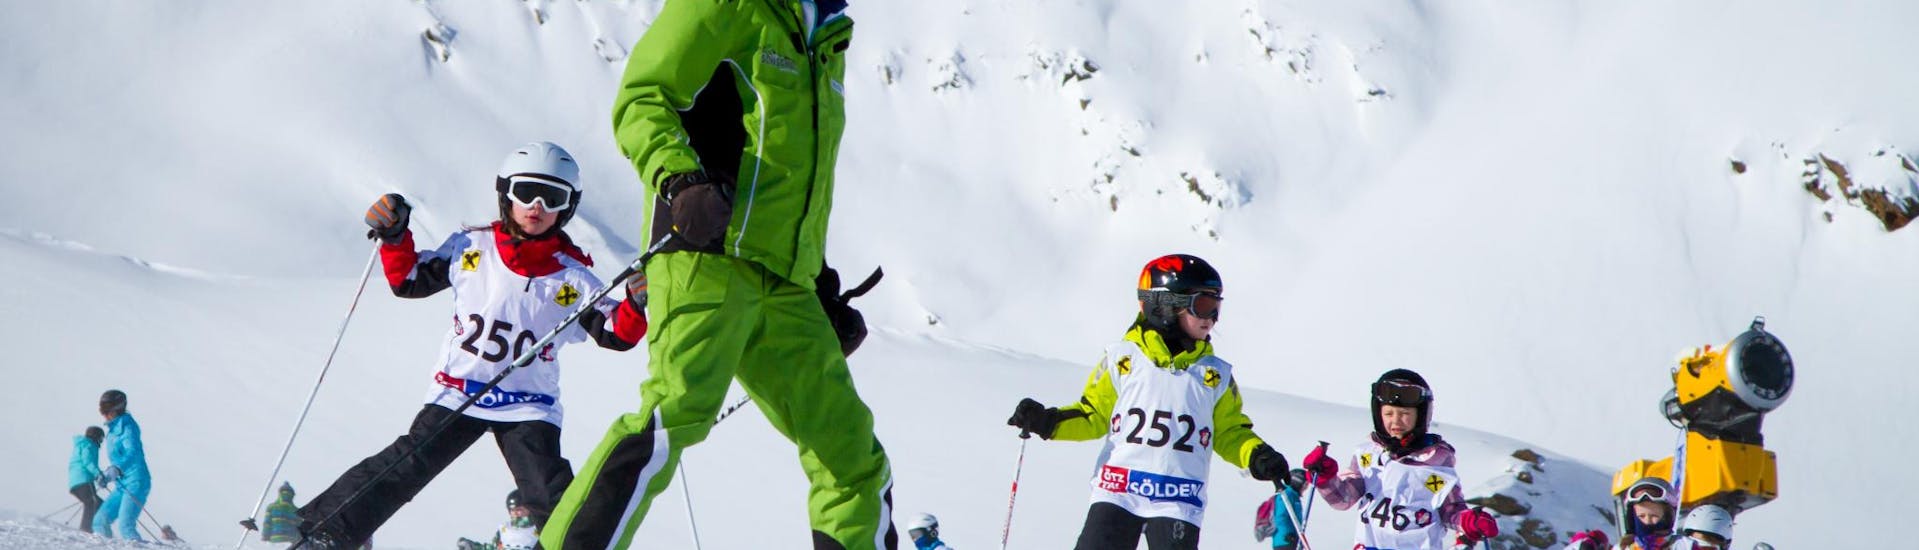 Kids Ski Lessons (4-10 y.) + Ski Hire Package for All Levels.